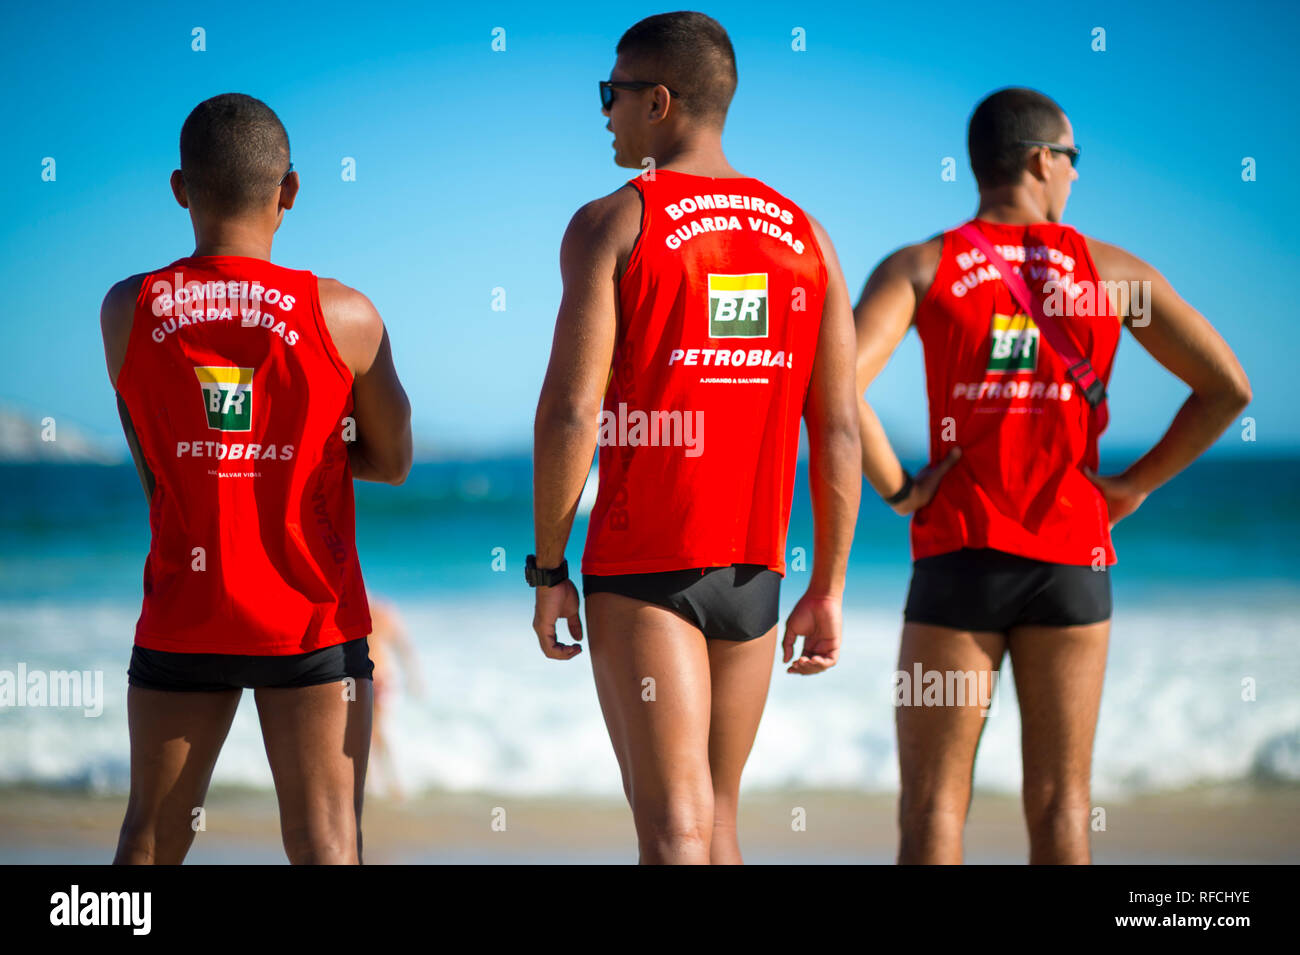 RIO DE JANEIRO - MARCH, 2018: A trio of Brazilian lifeguards in uniforms sponsored by embattled oil company Petrobras monitor surf on Ipanema Beach. Stock Photo